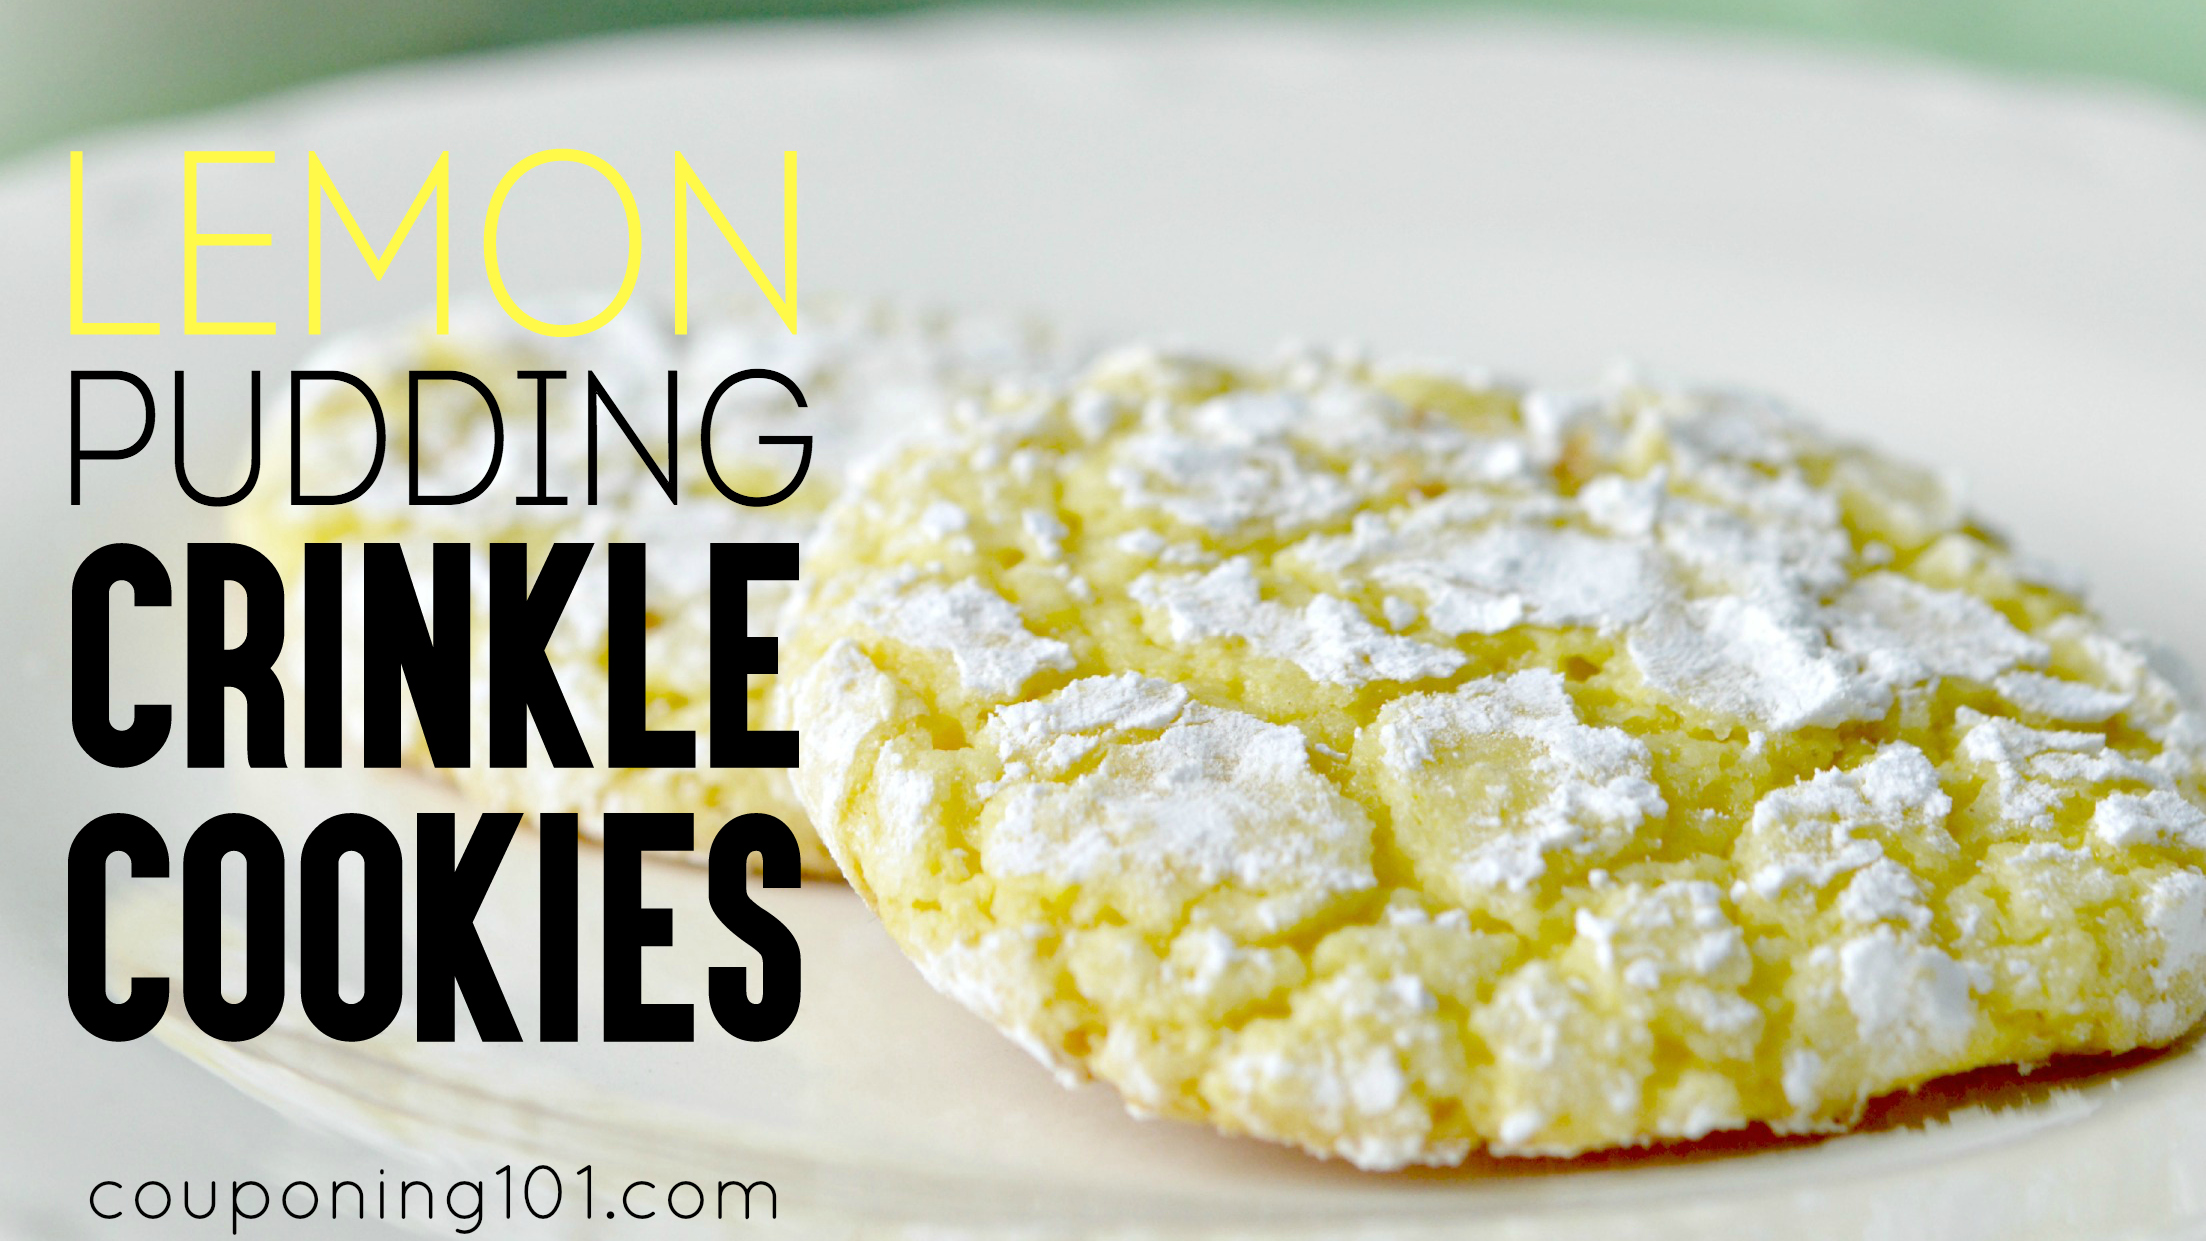 Lemon Pudding Crinkle Cookies - soft and chewy on the inside, crinkly and sugared on the outside. So good!